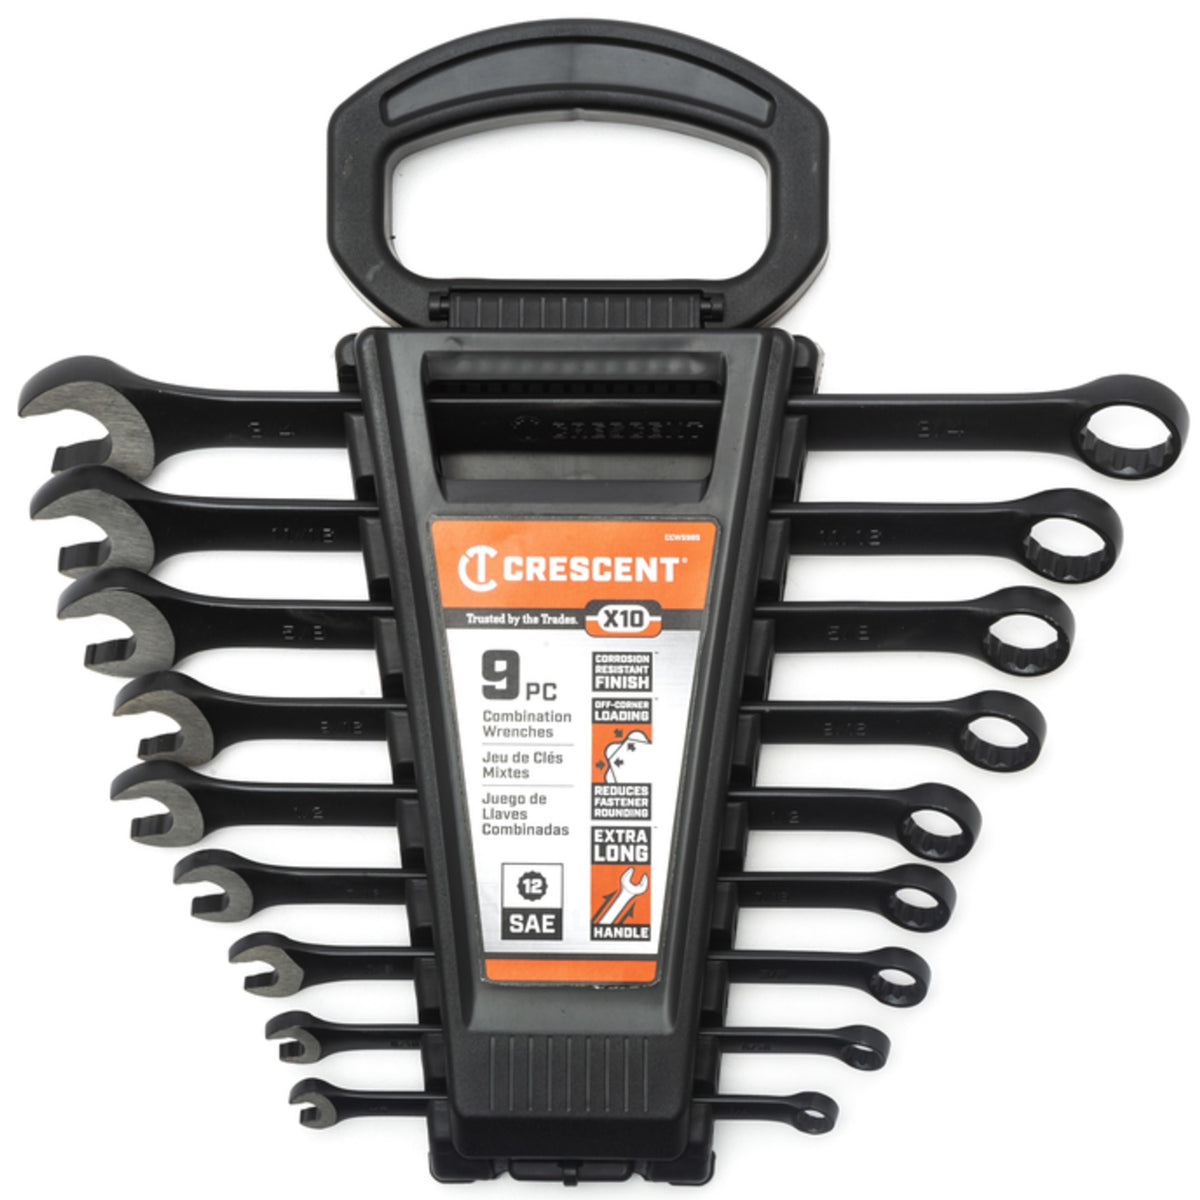 Buy crescent x10 - Online store for tradesman tools, sae & metric in USA, on sale, low price, discount deals, coupon code